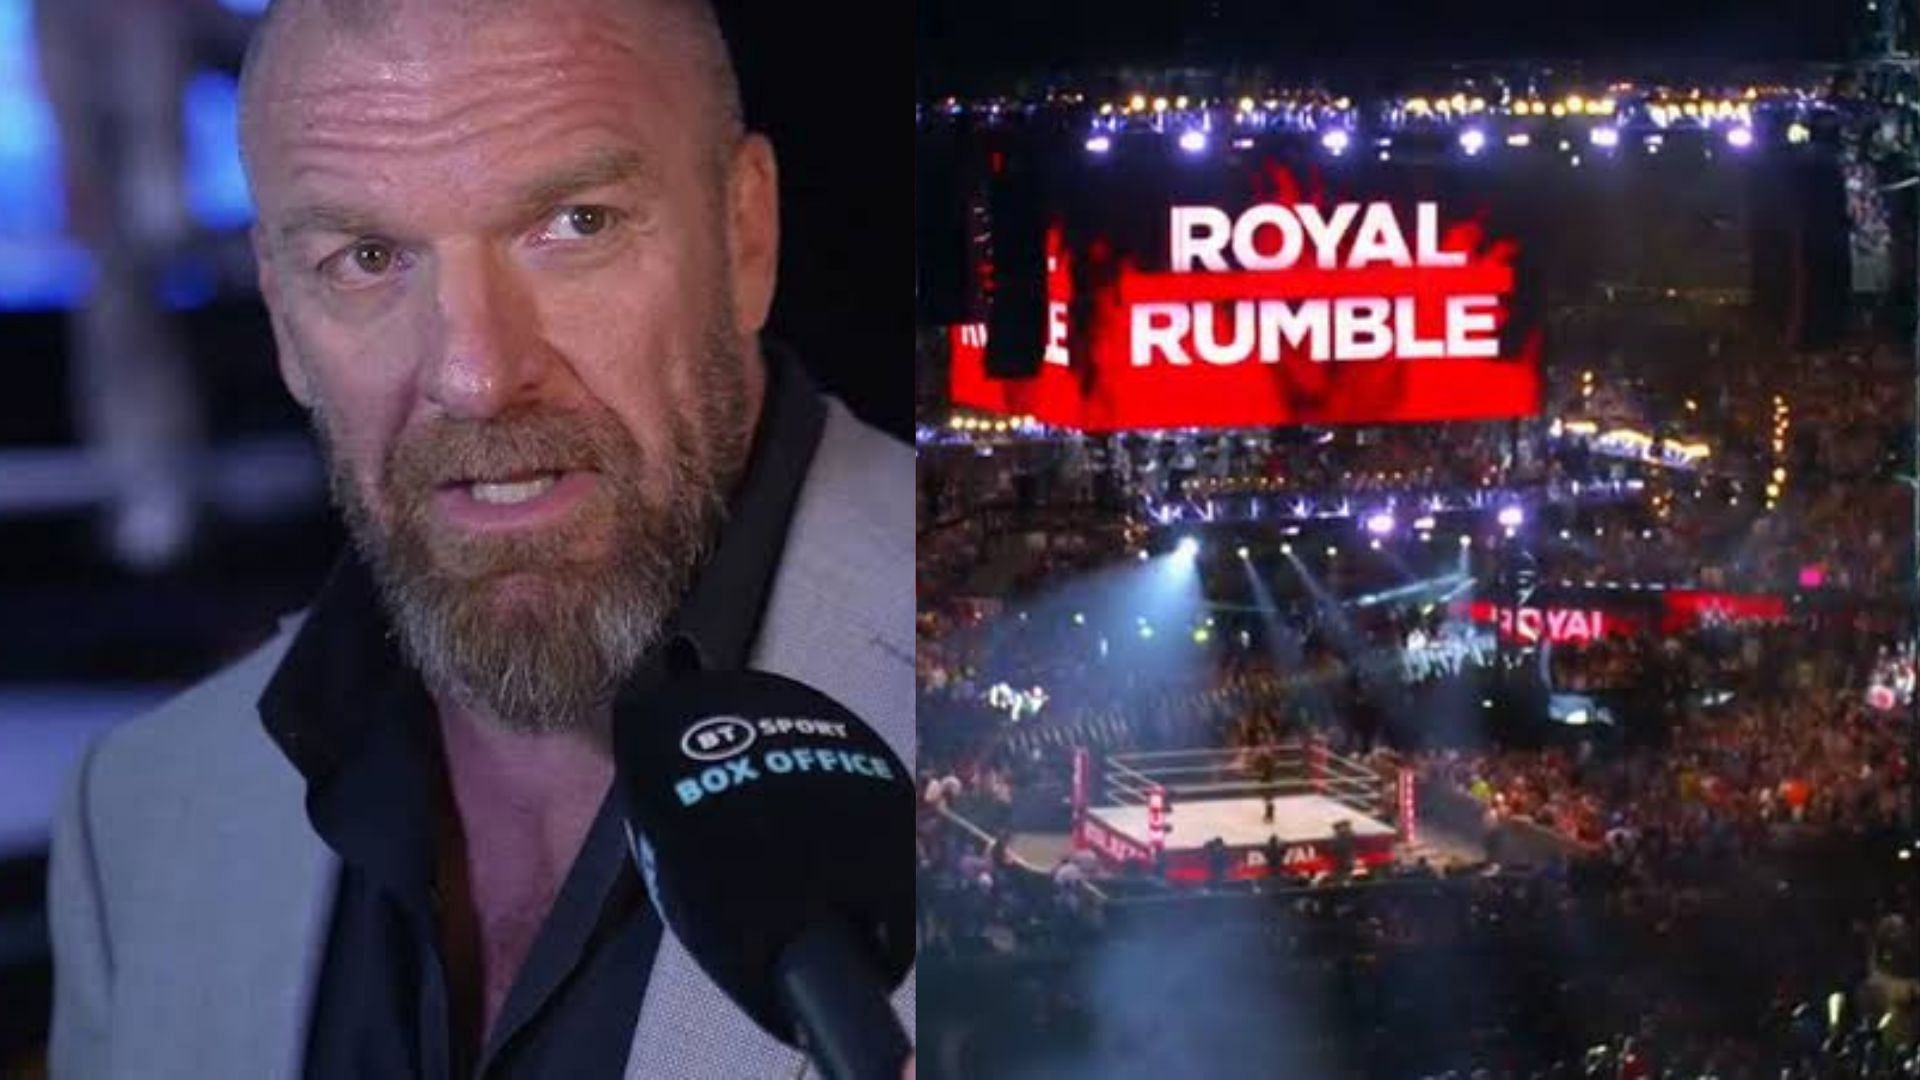 Royal Rumble 2023 is just around the corner.